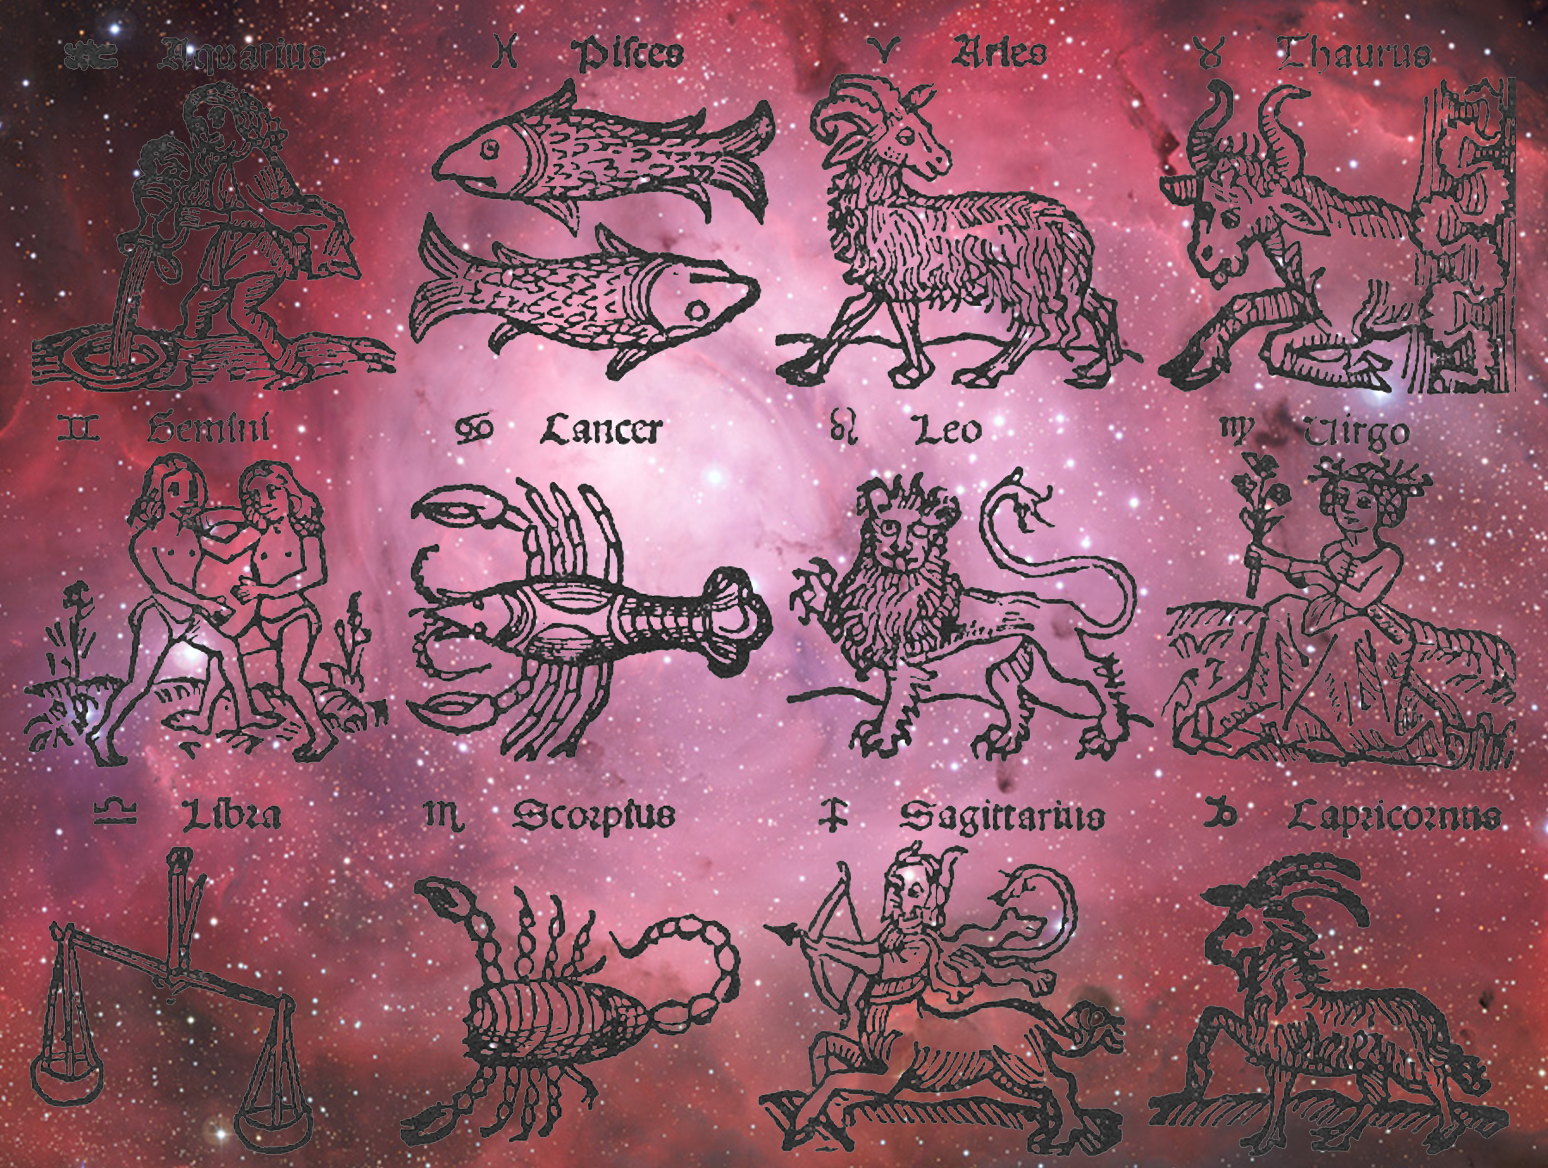 the emperor free will astrology